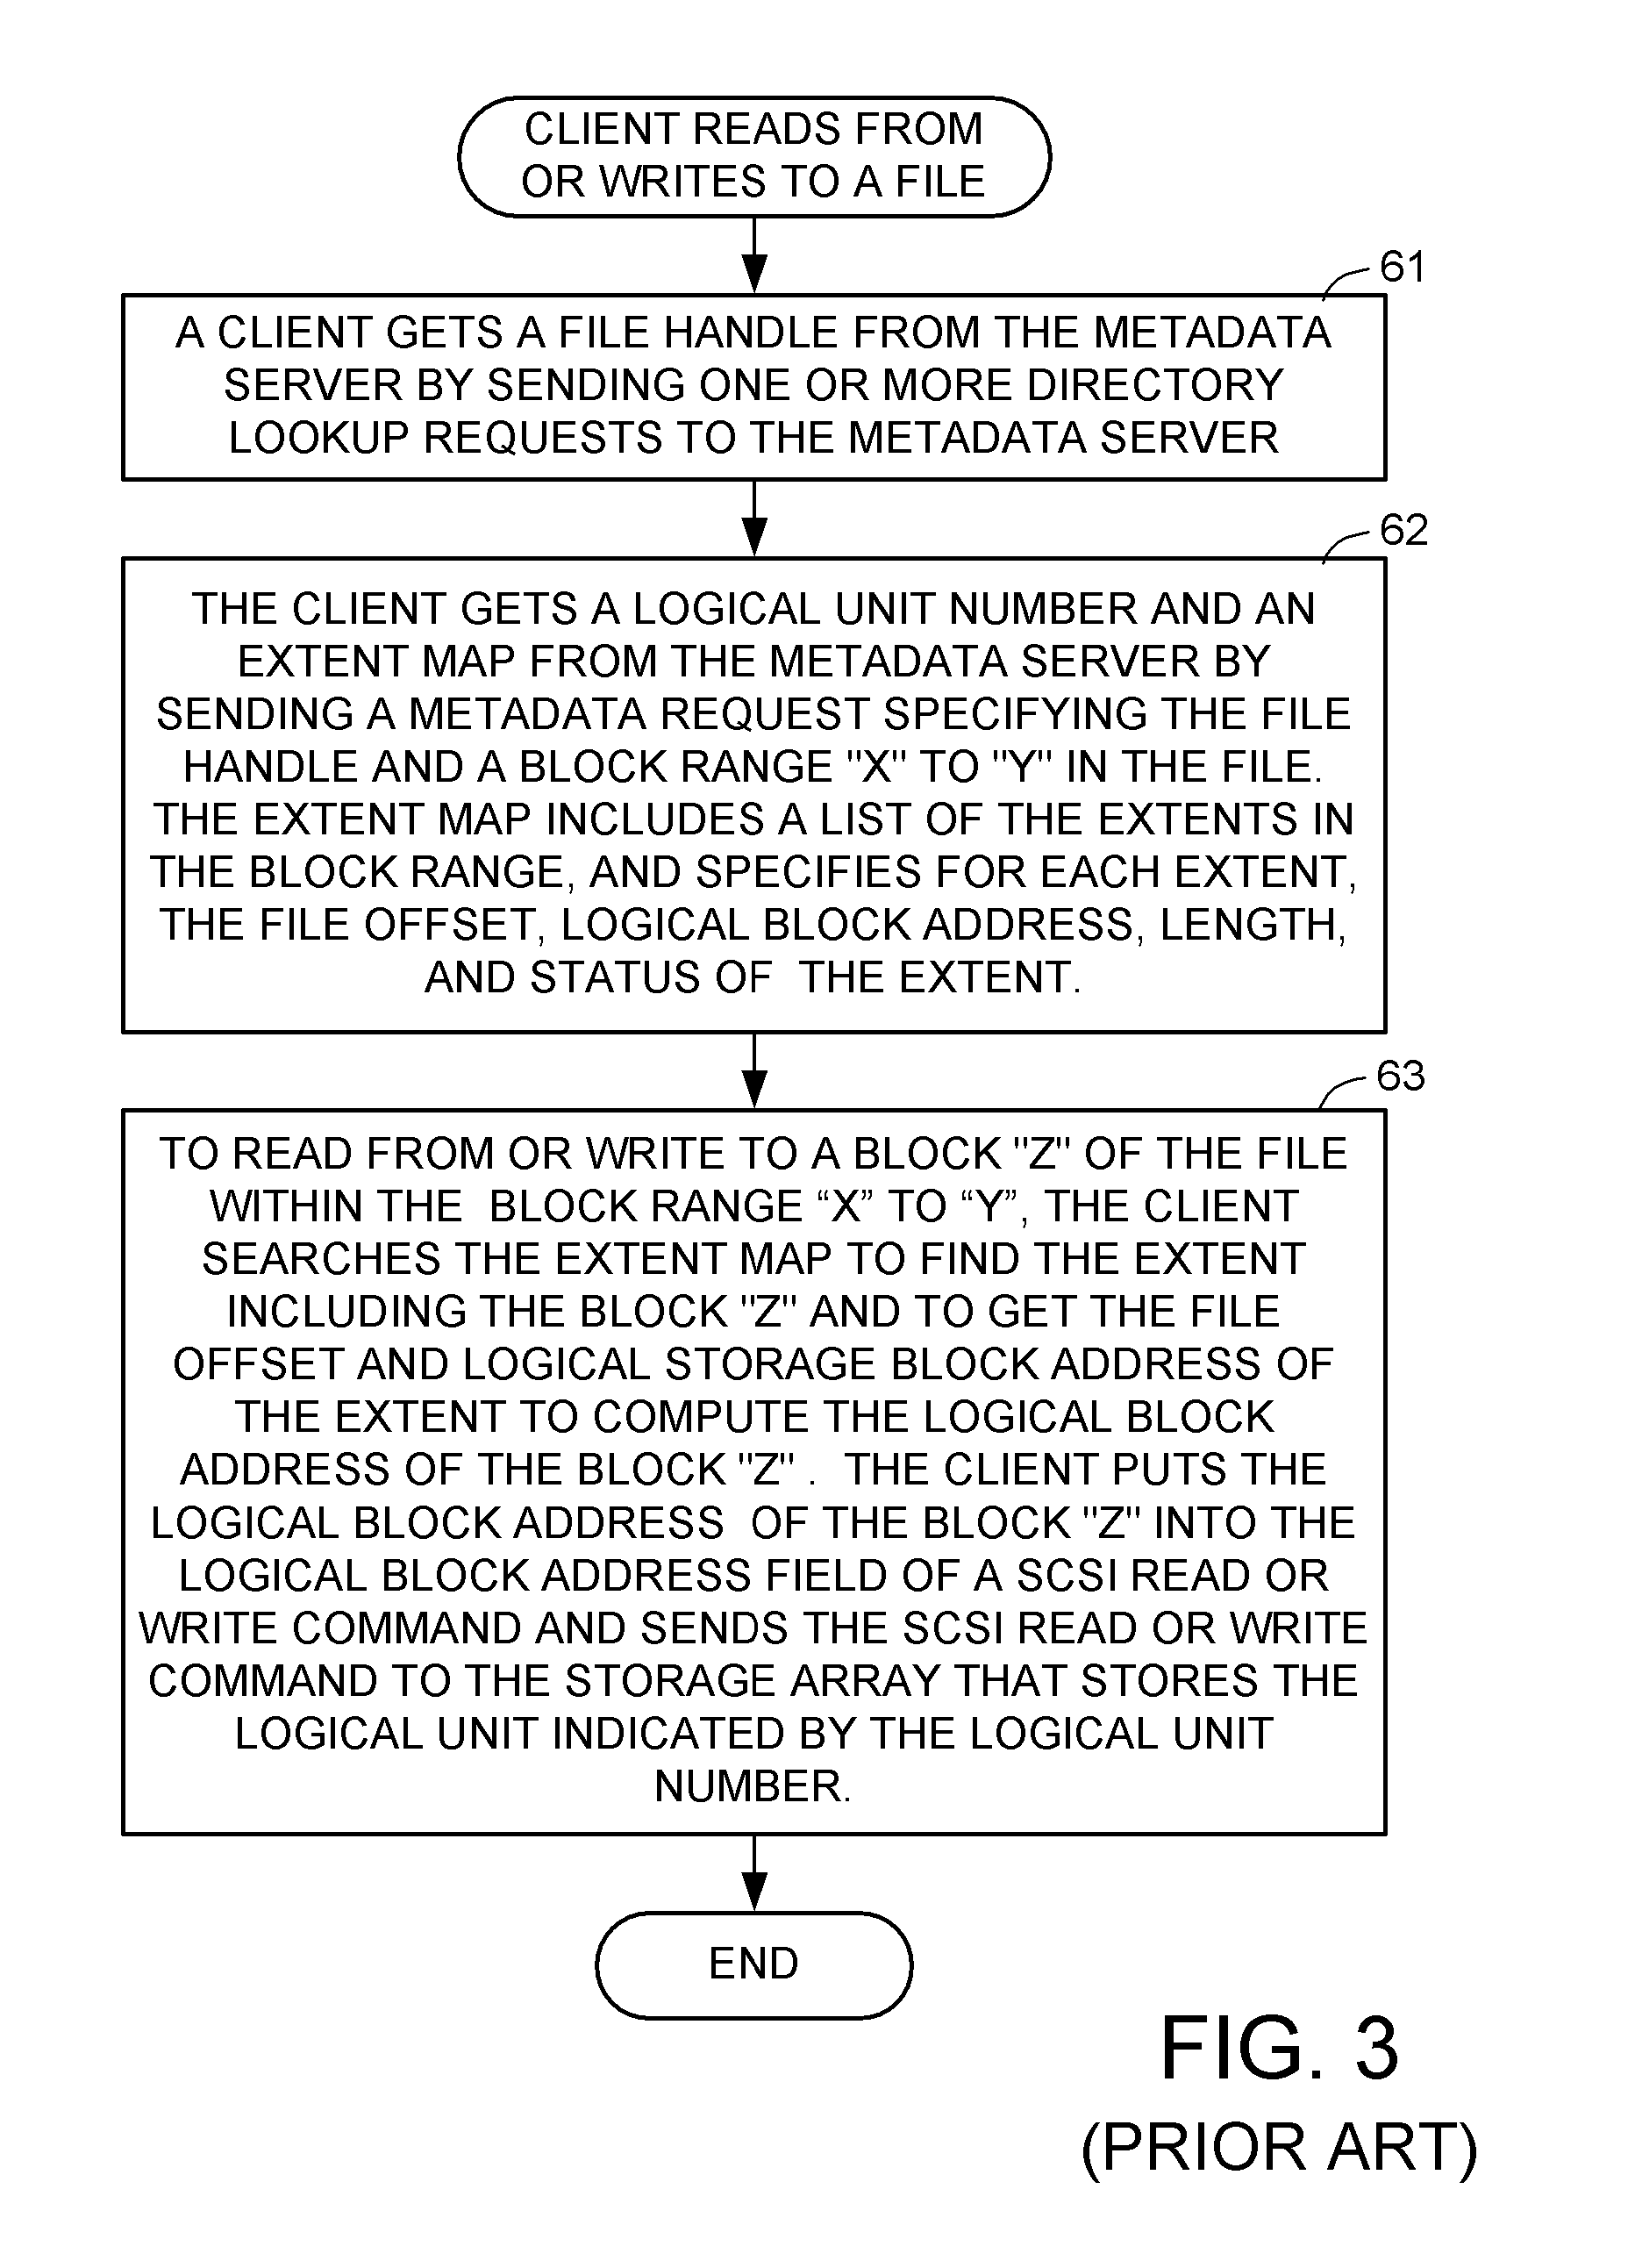 Access control to block storage devices for a shared disk based file system